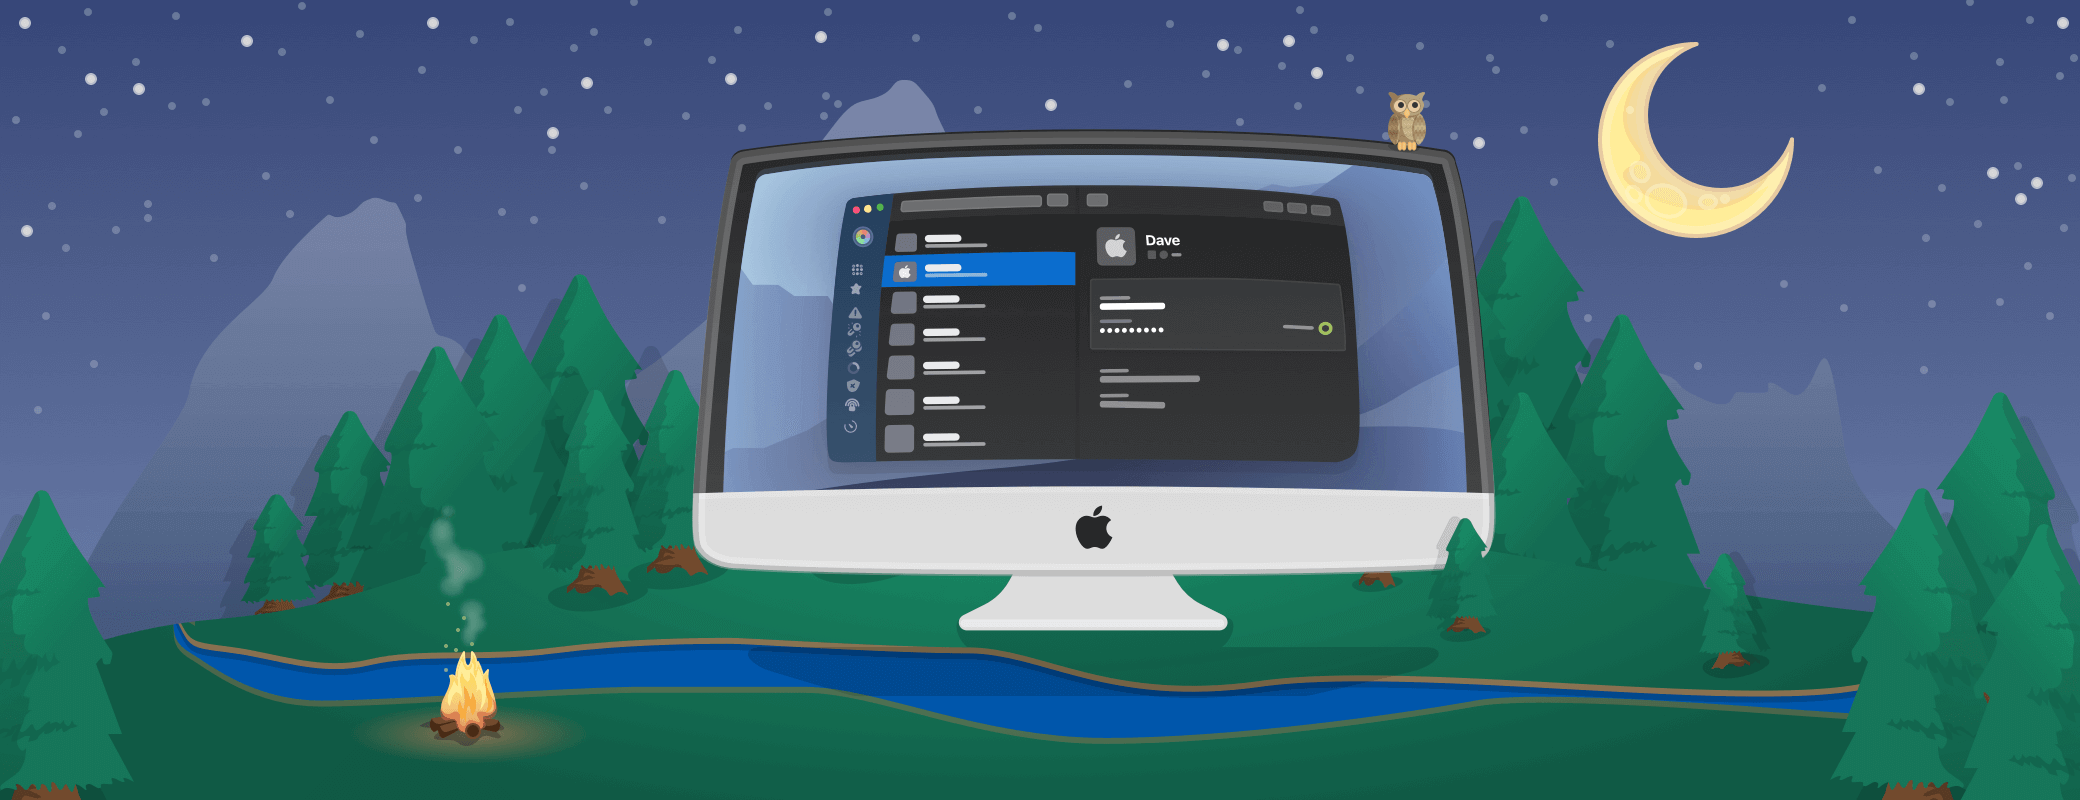 1Password 7.2 for Mac: Welcome to the dark side